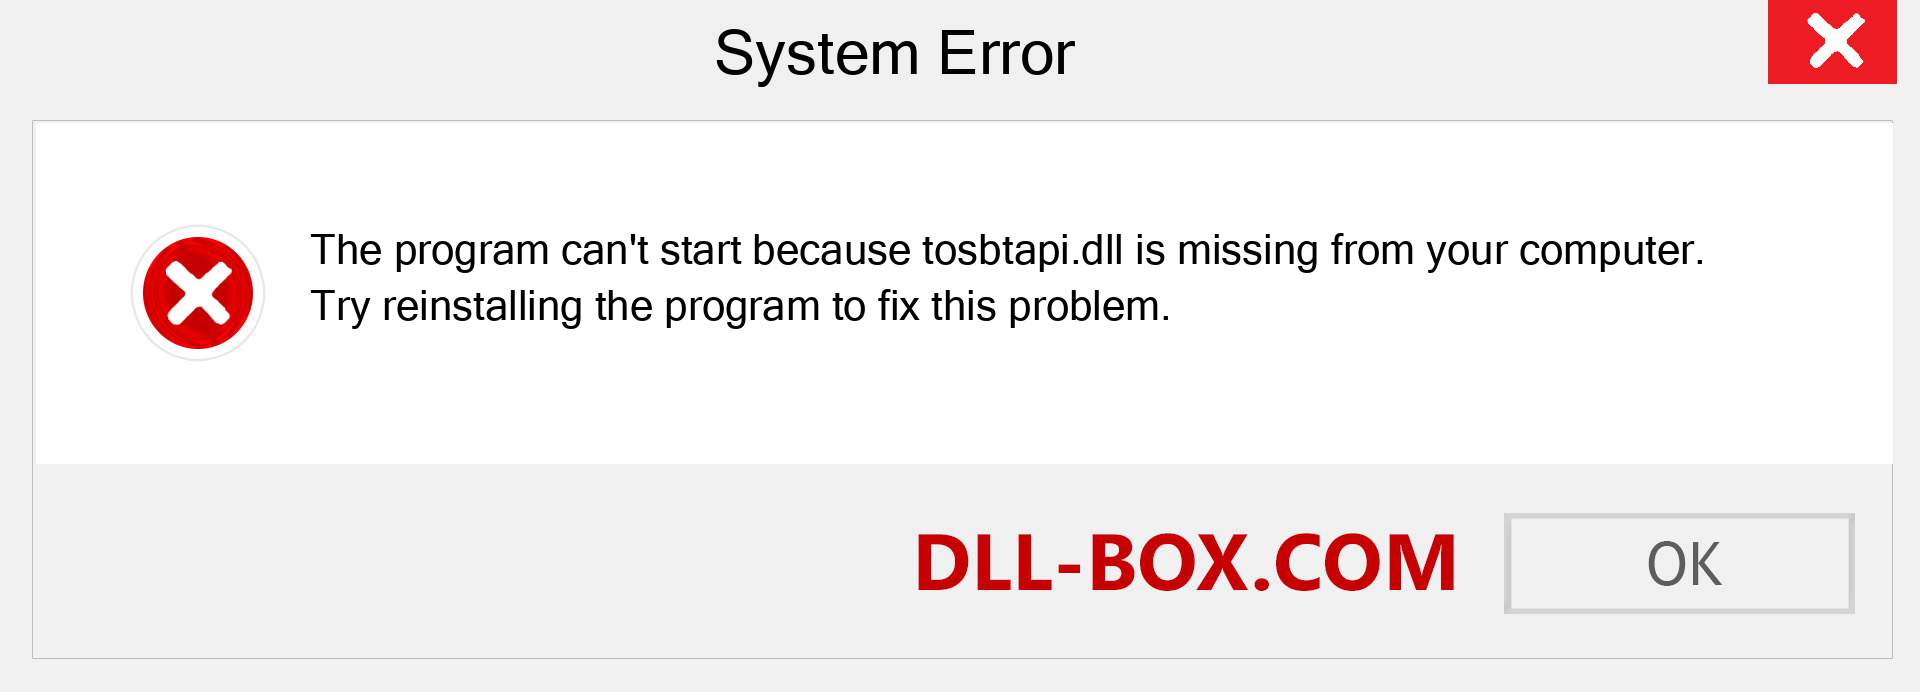  tosbtapi.dll file is missing?. Download for Windows 7, 8, 10 - Fix  tosbtapi dll Missing Error on Windows, photos, images